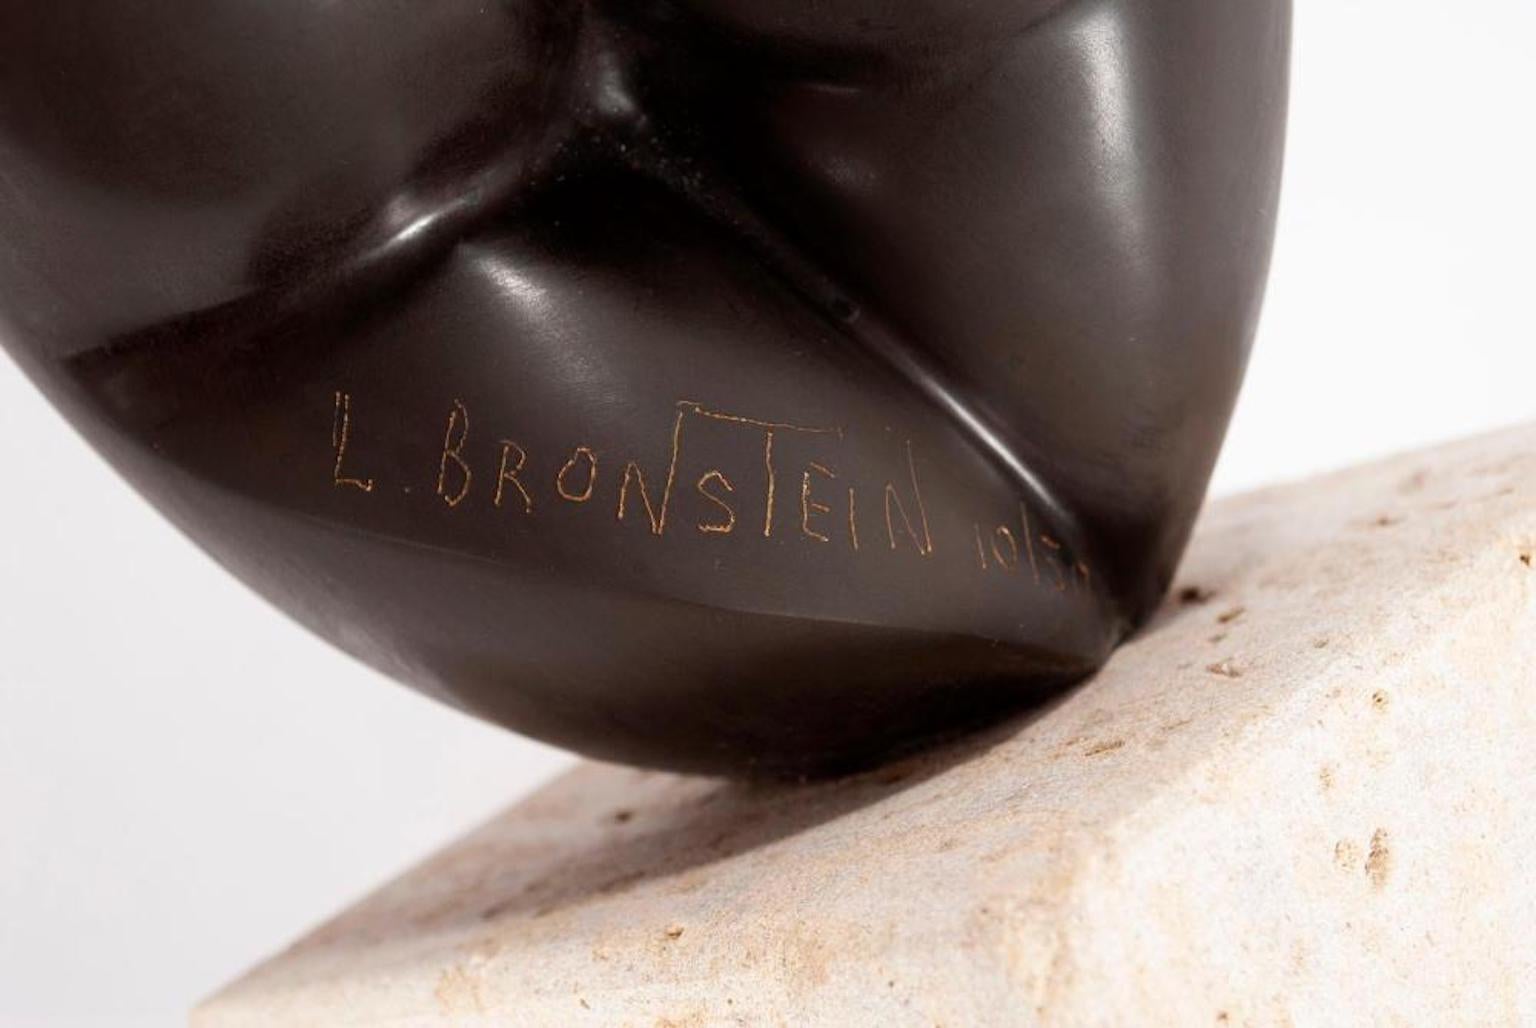 Bronzed torso by Leon Bronstein, original signed and mounted. Russian American artist and sculpture.